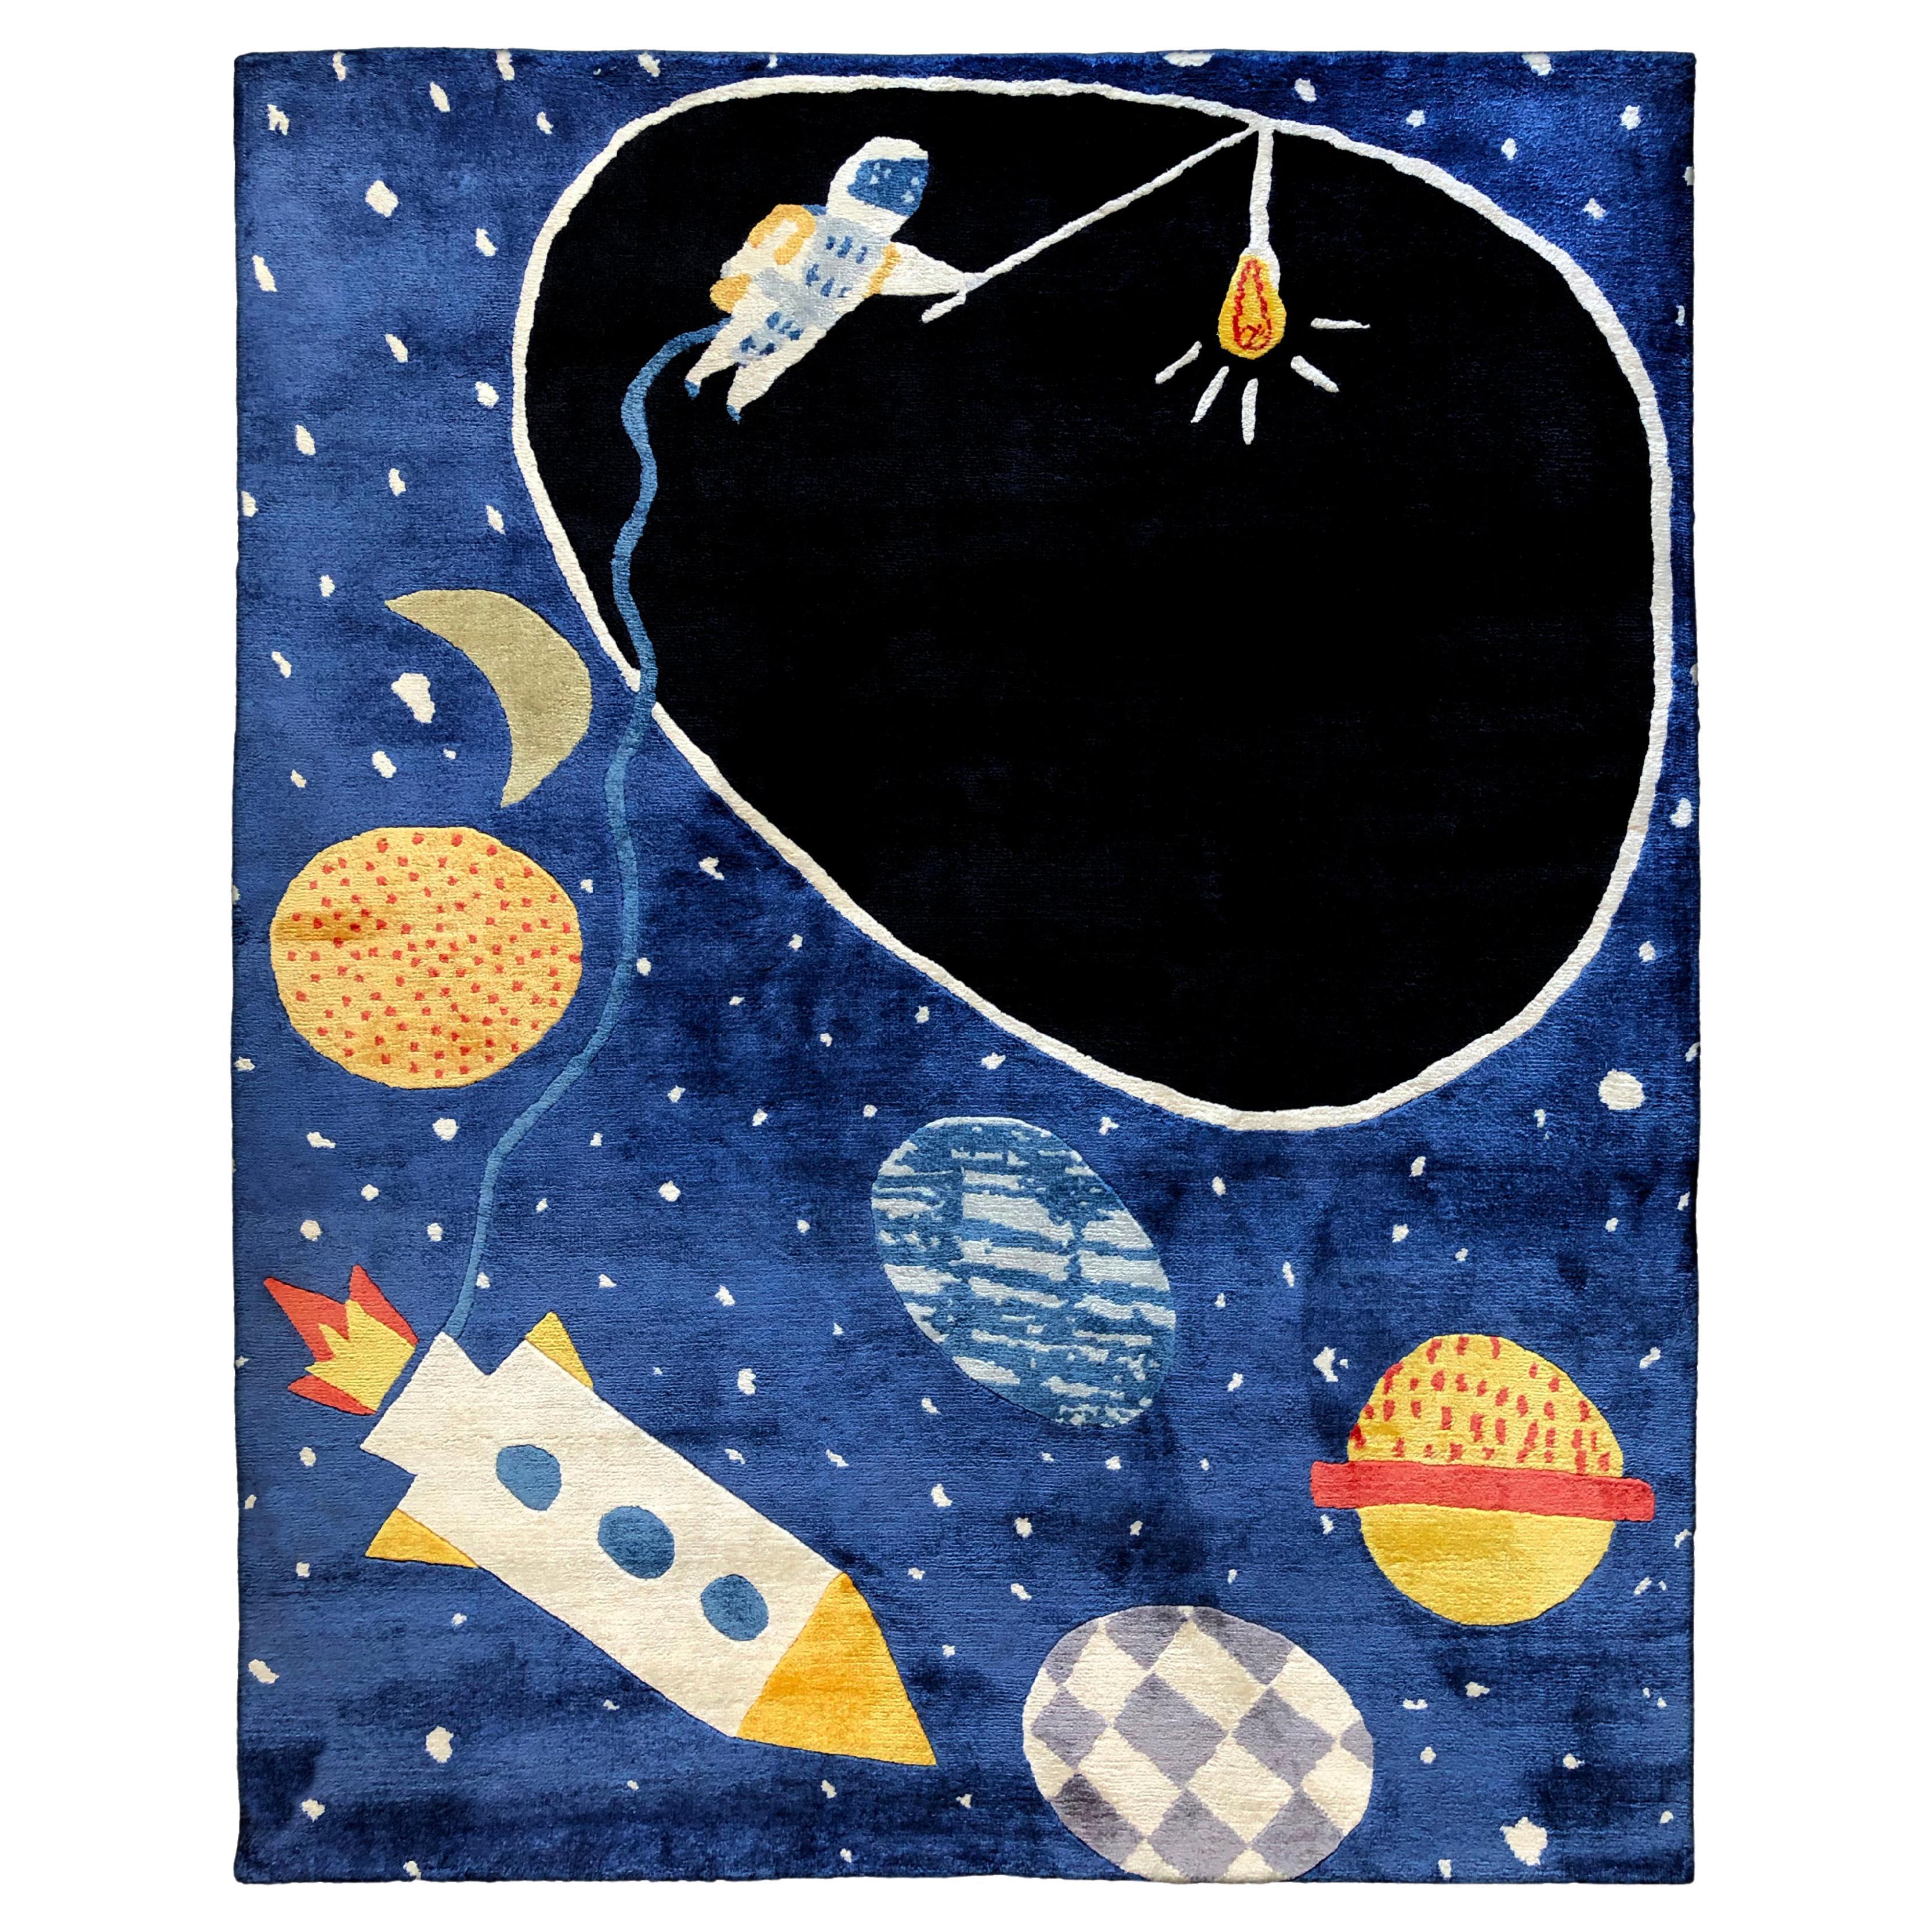 SPACE ACE RUG by Daria Solak, Hand Knotted, 100% New Zealand Wool 150 x 190 cm